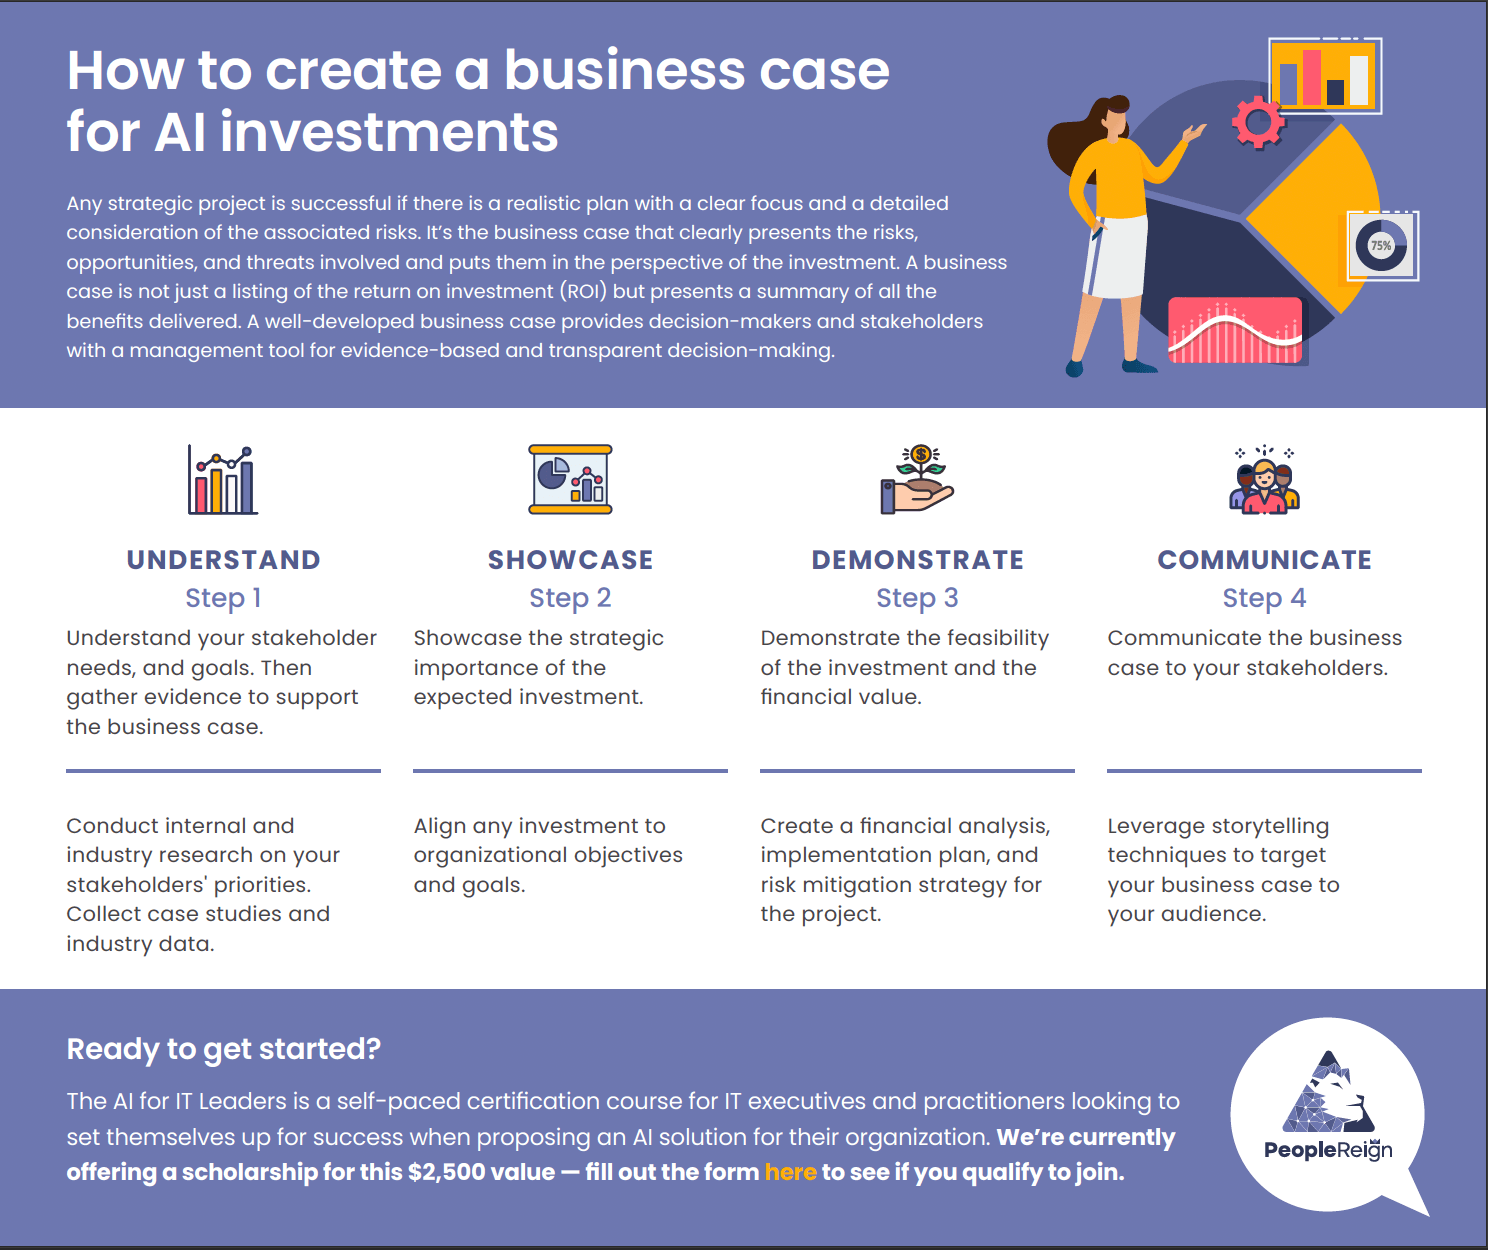 How to create a business case